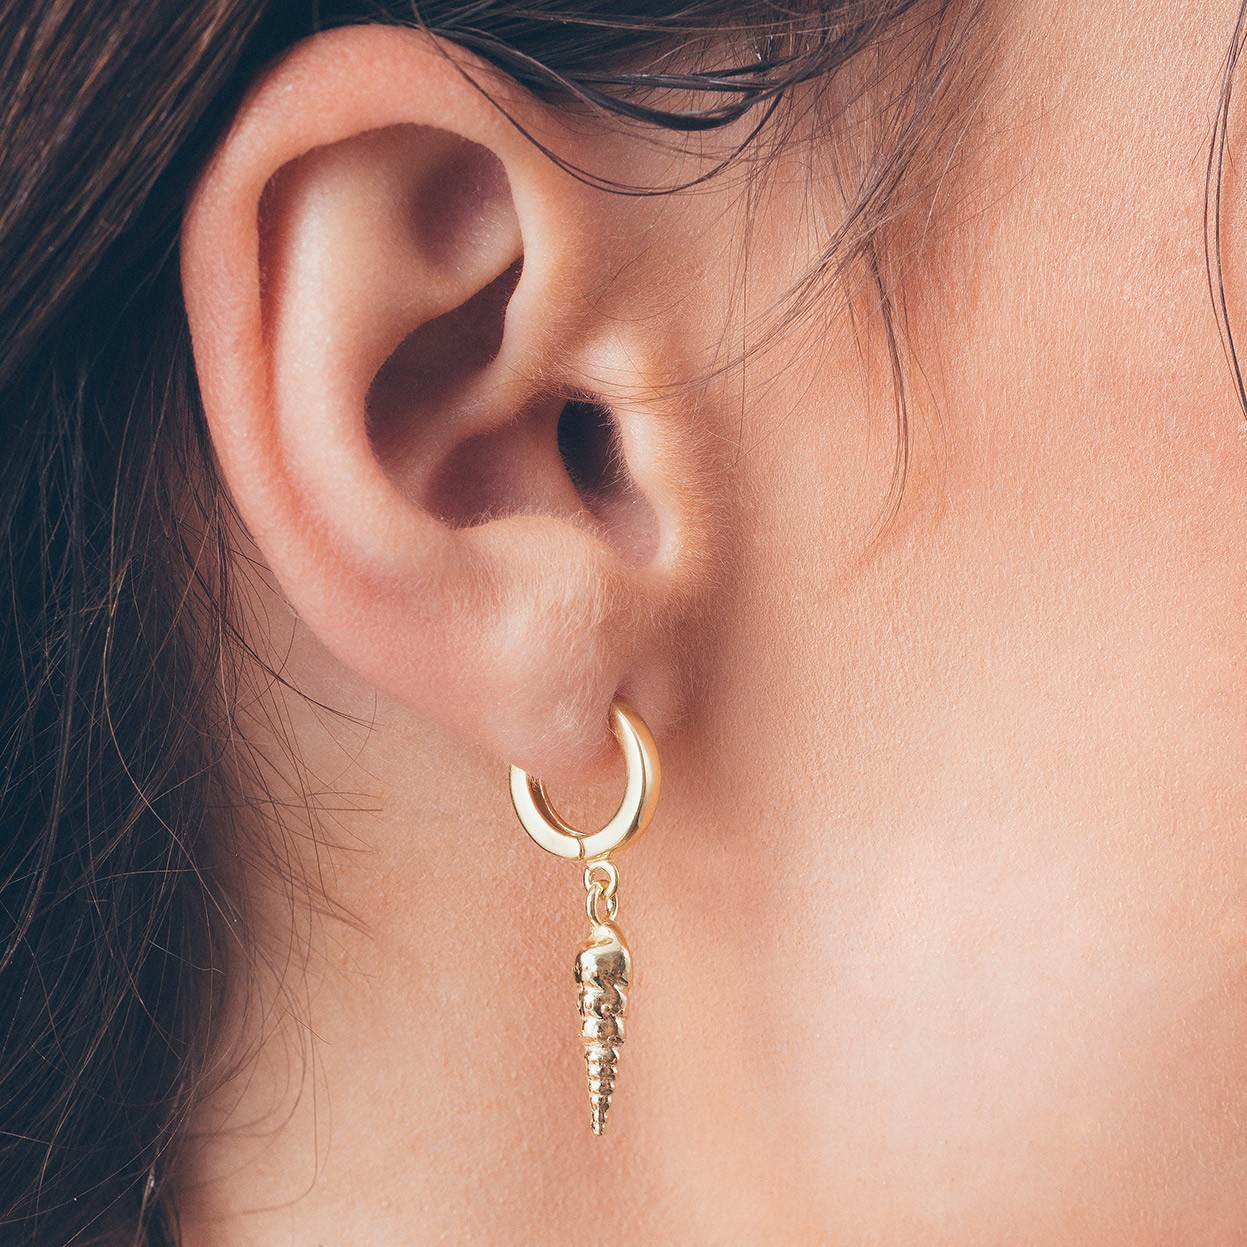 Hoop earring - shell with pearl, T°ra'vel'' sterling silver 925